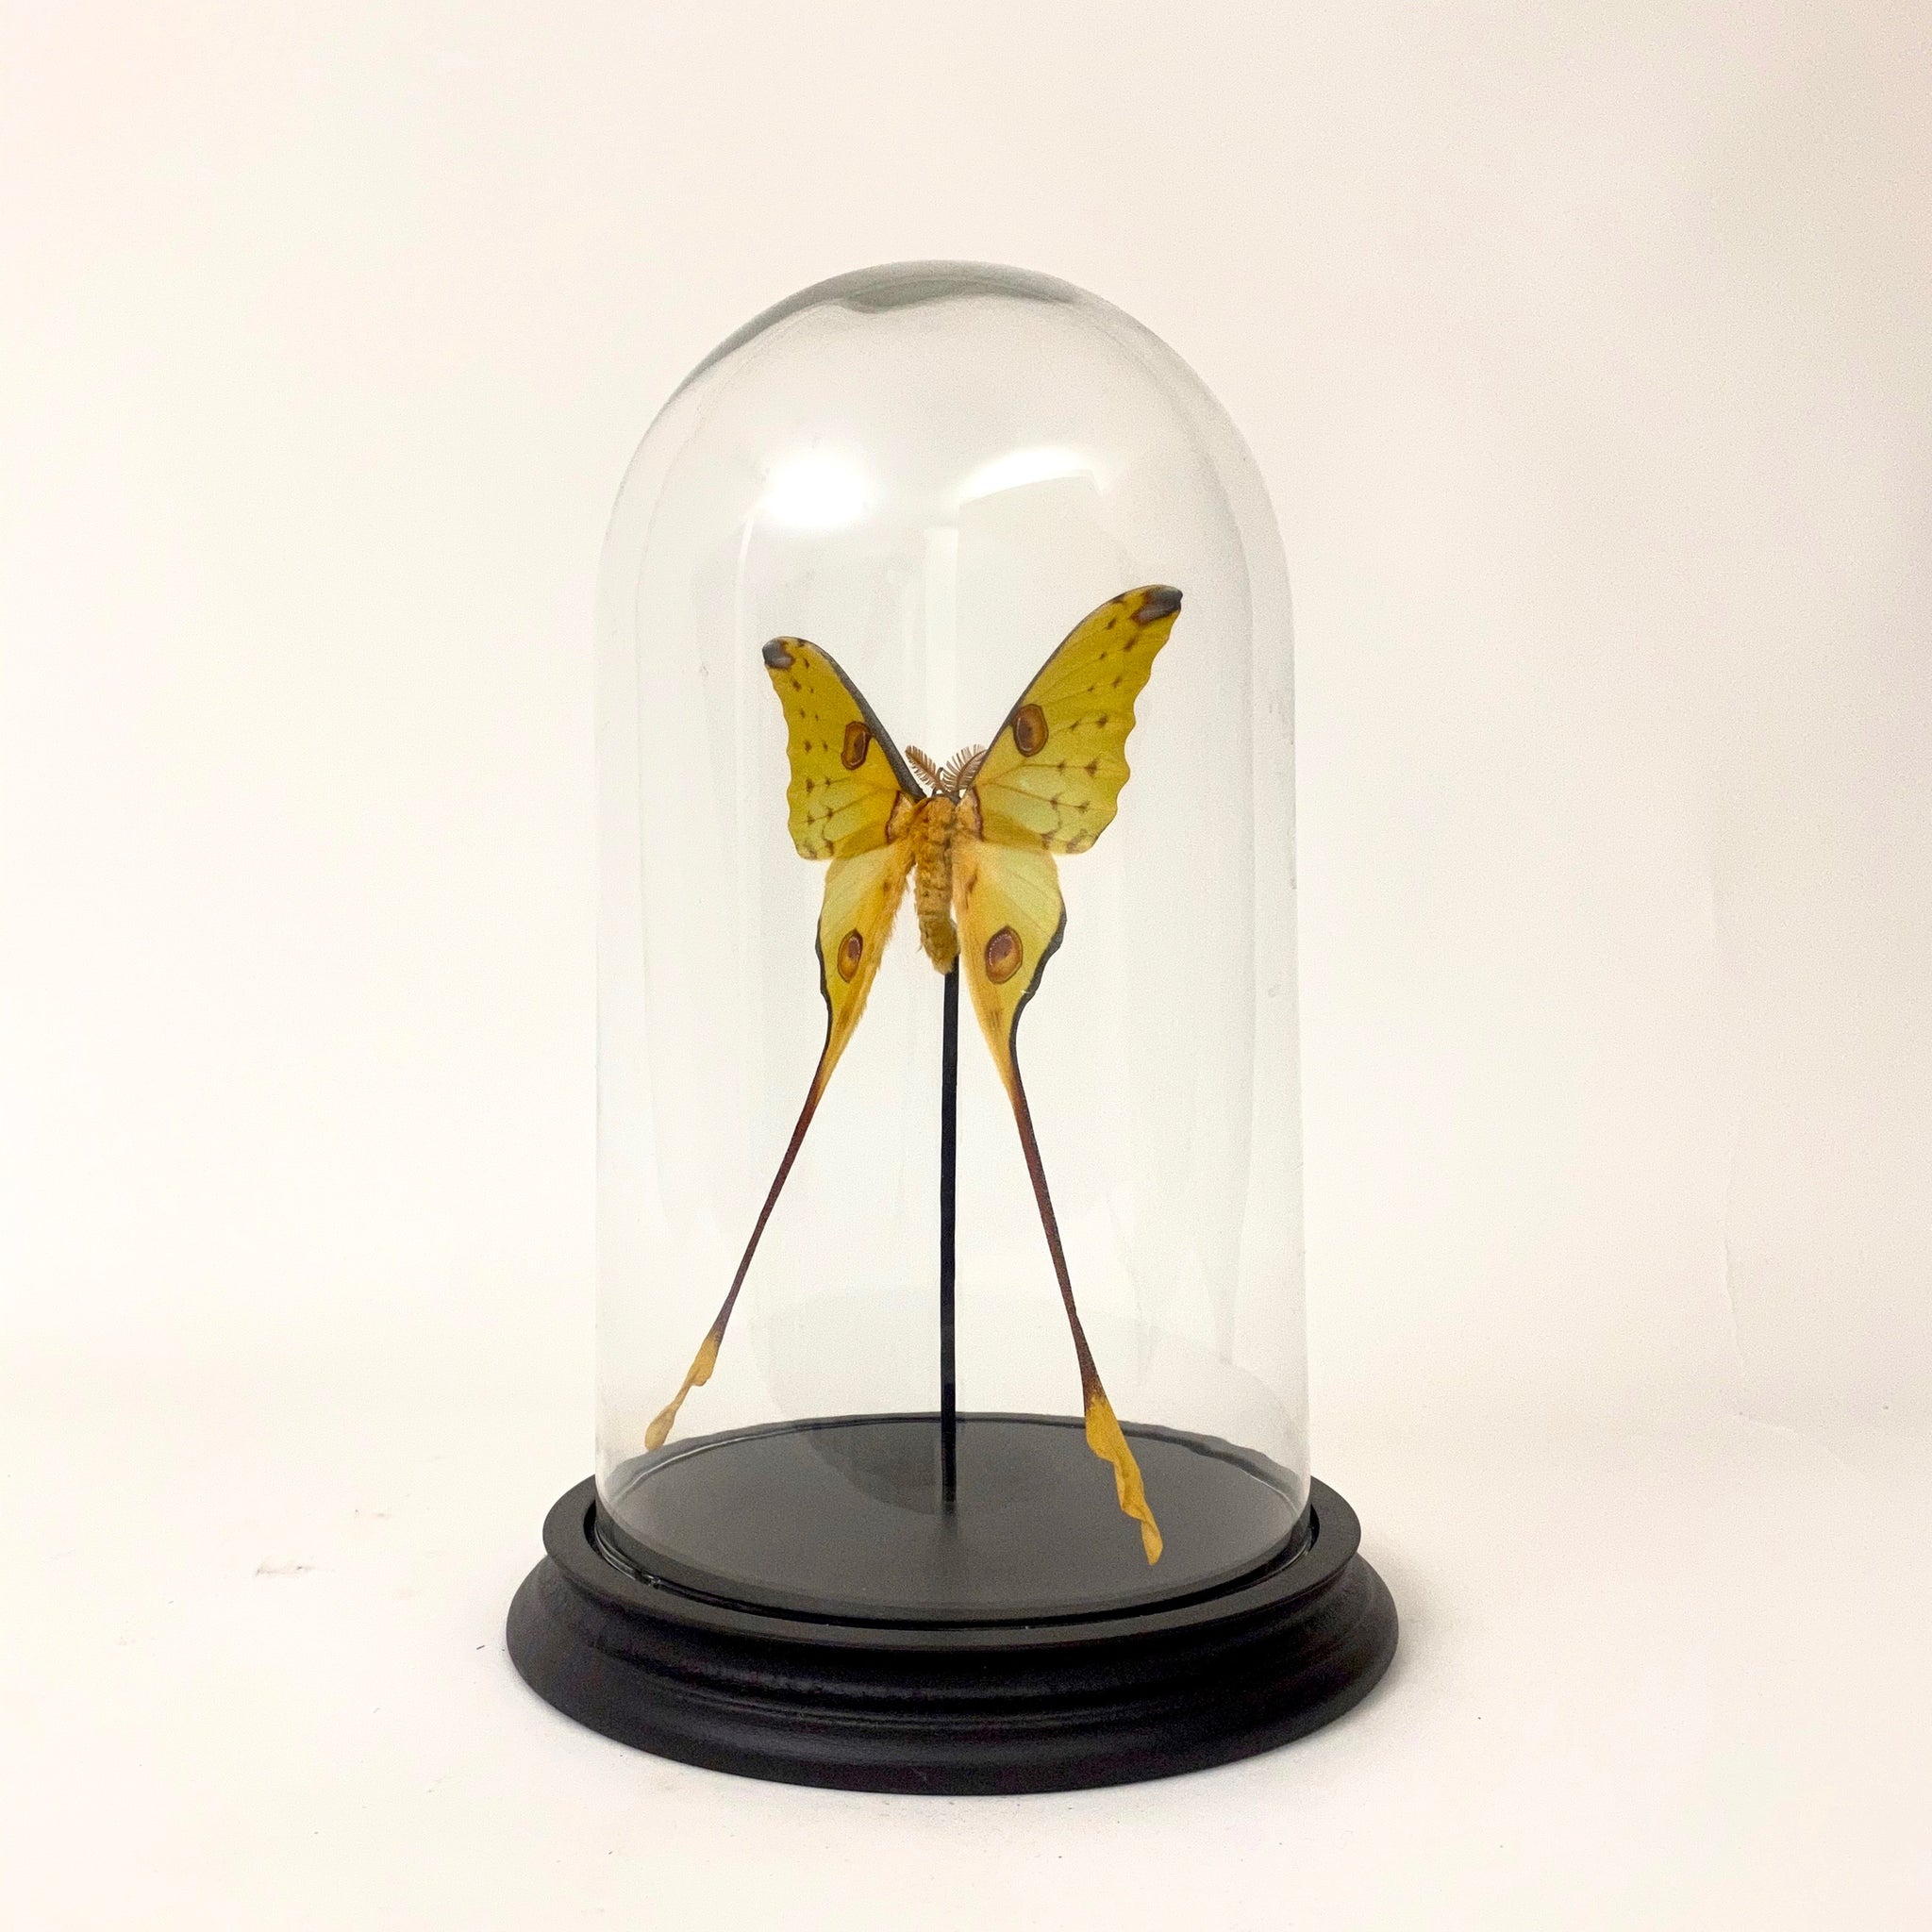 Stunning Moon moth specimen in large glass dome.